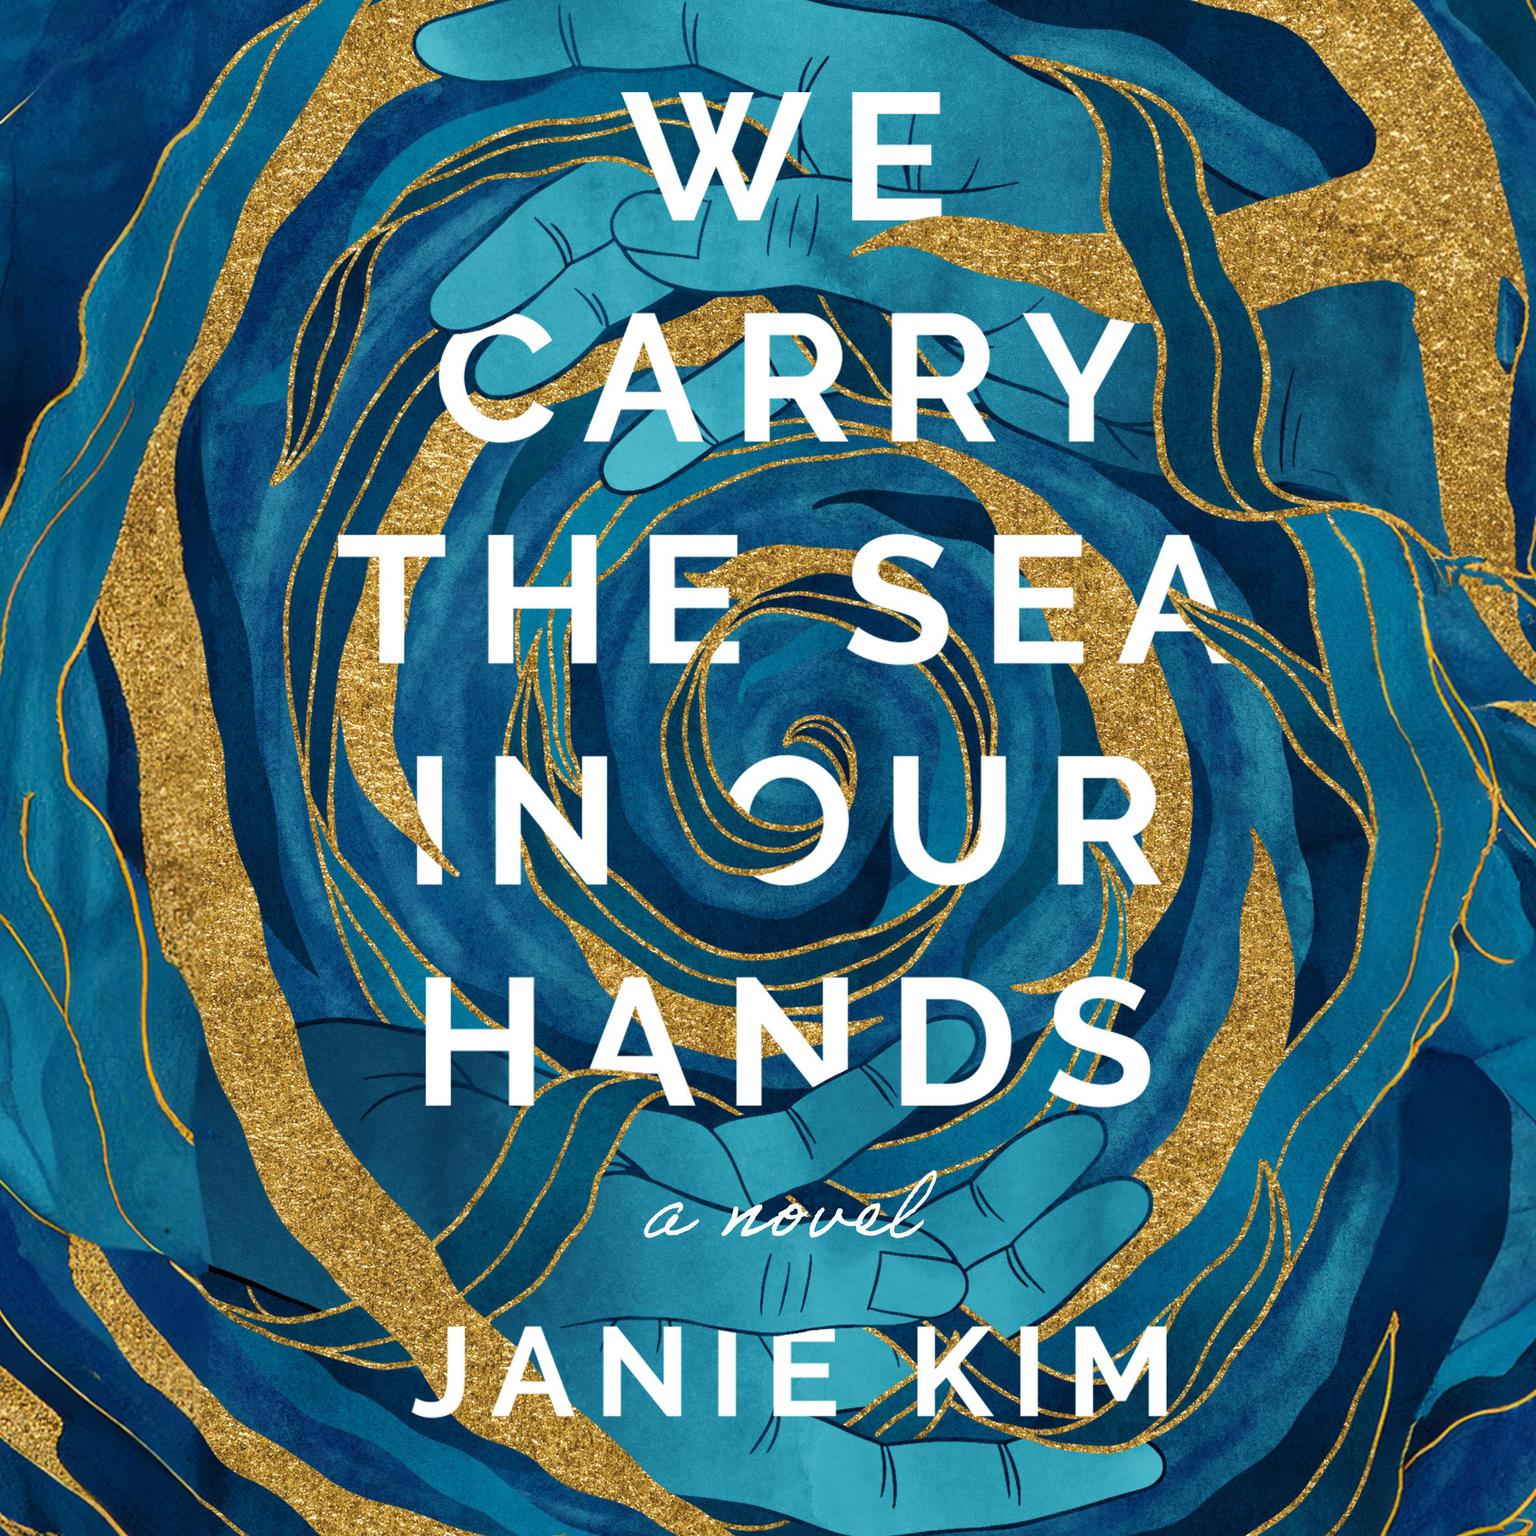 We Carry the Sea in Our Hands Audiobook, by Janie Kim